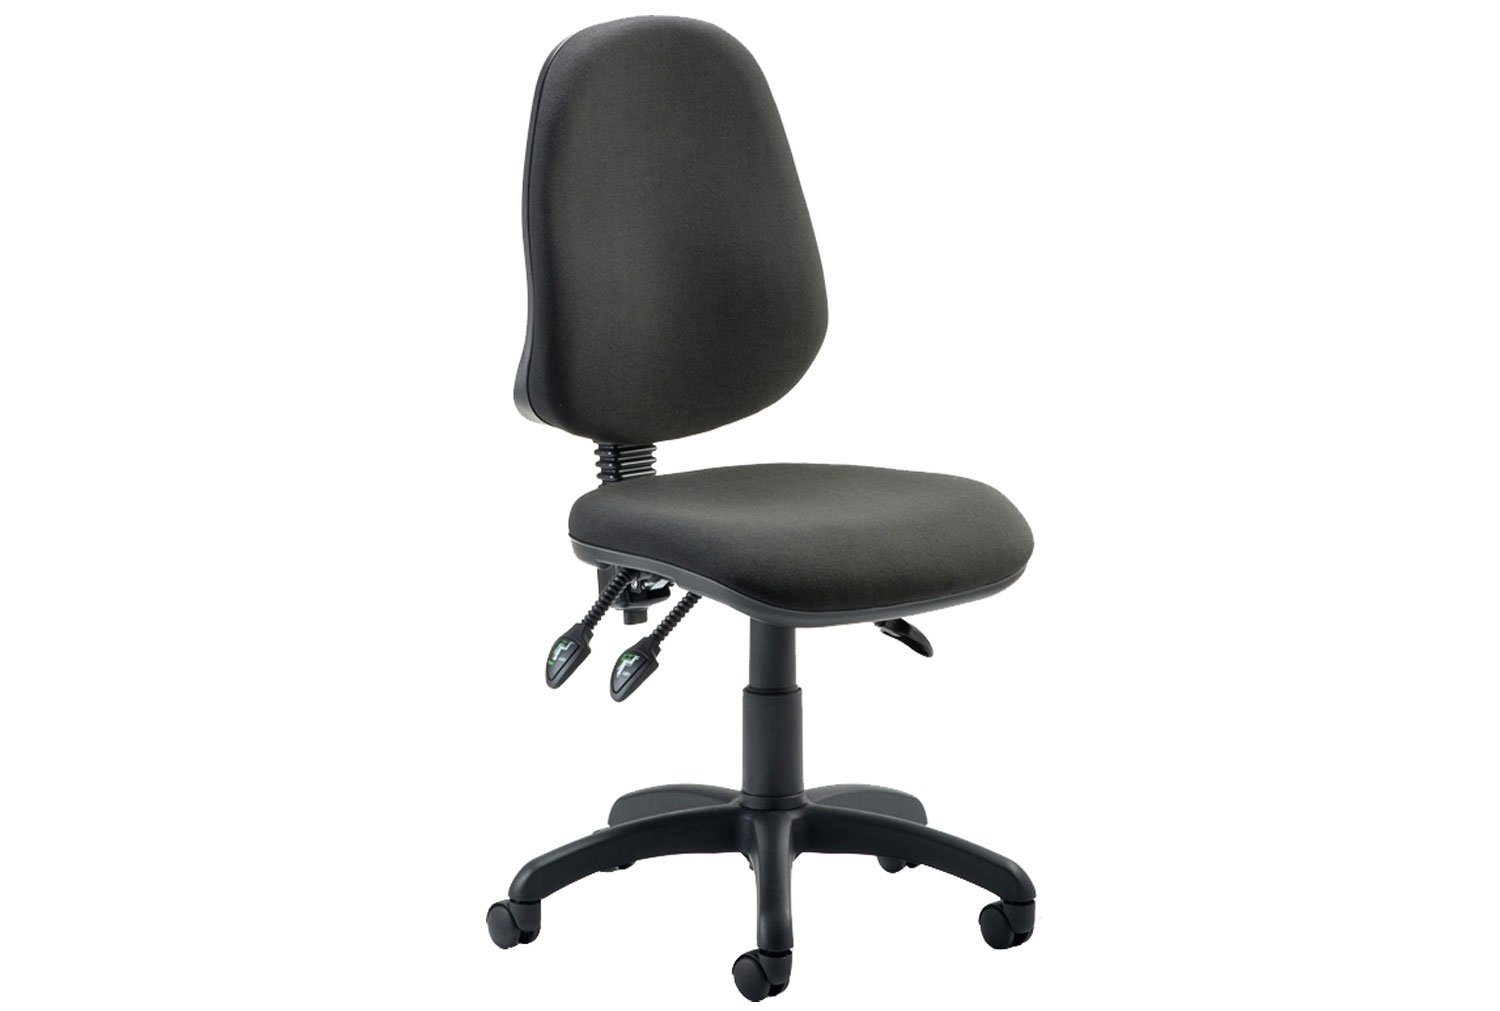 Lunar 3 Lever Operator Office Chair With No Arms, Black, Fully Installed